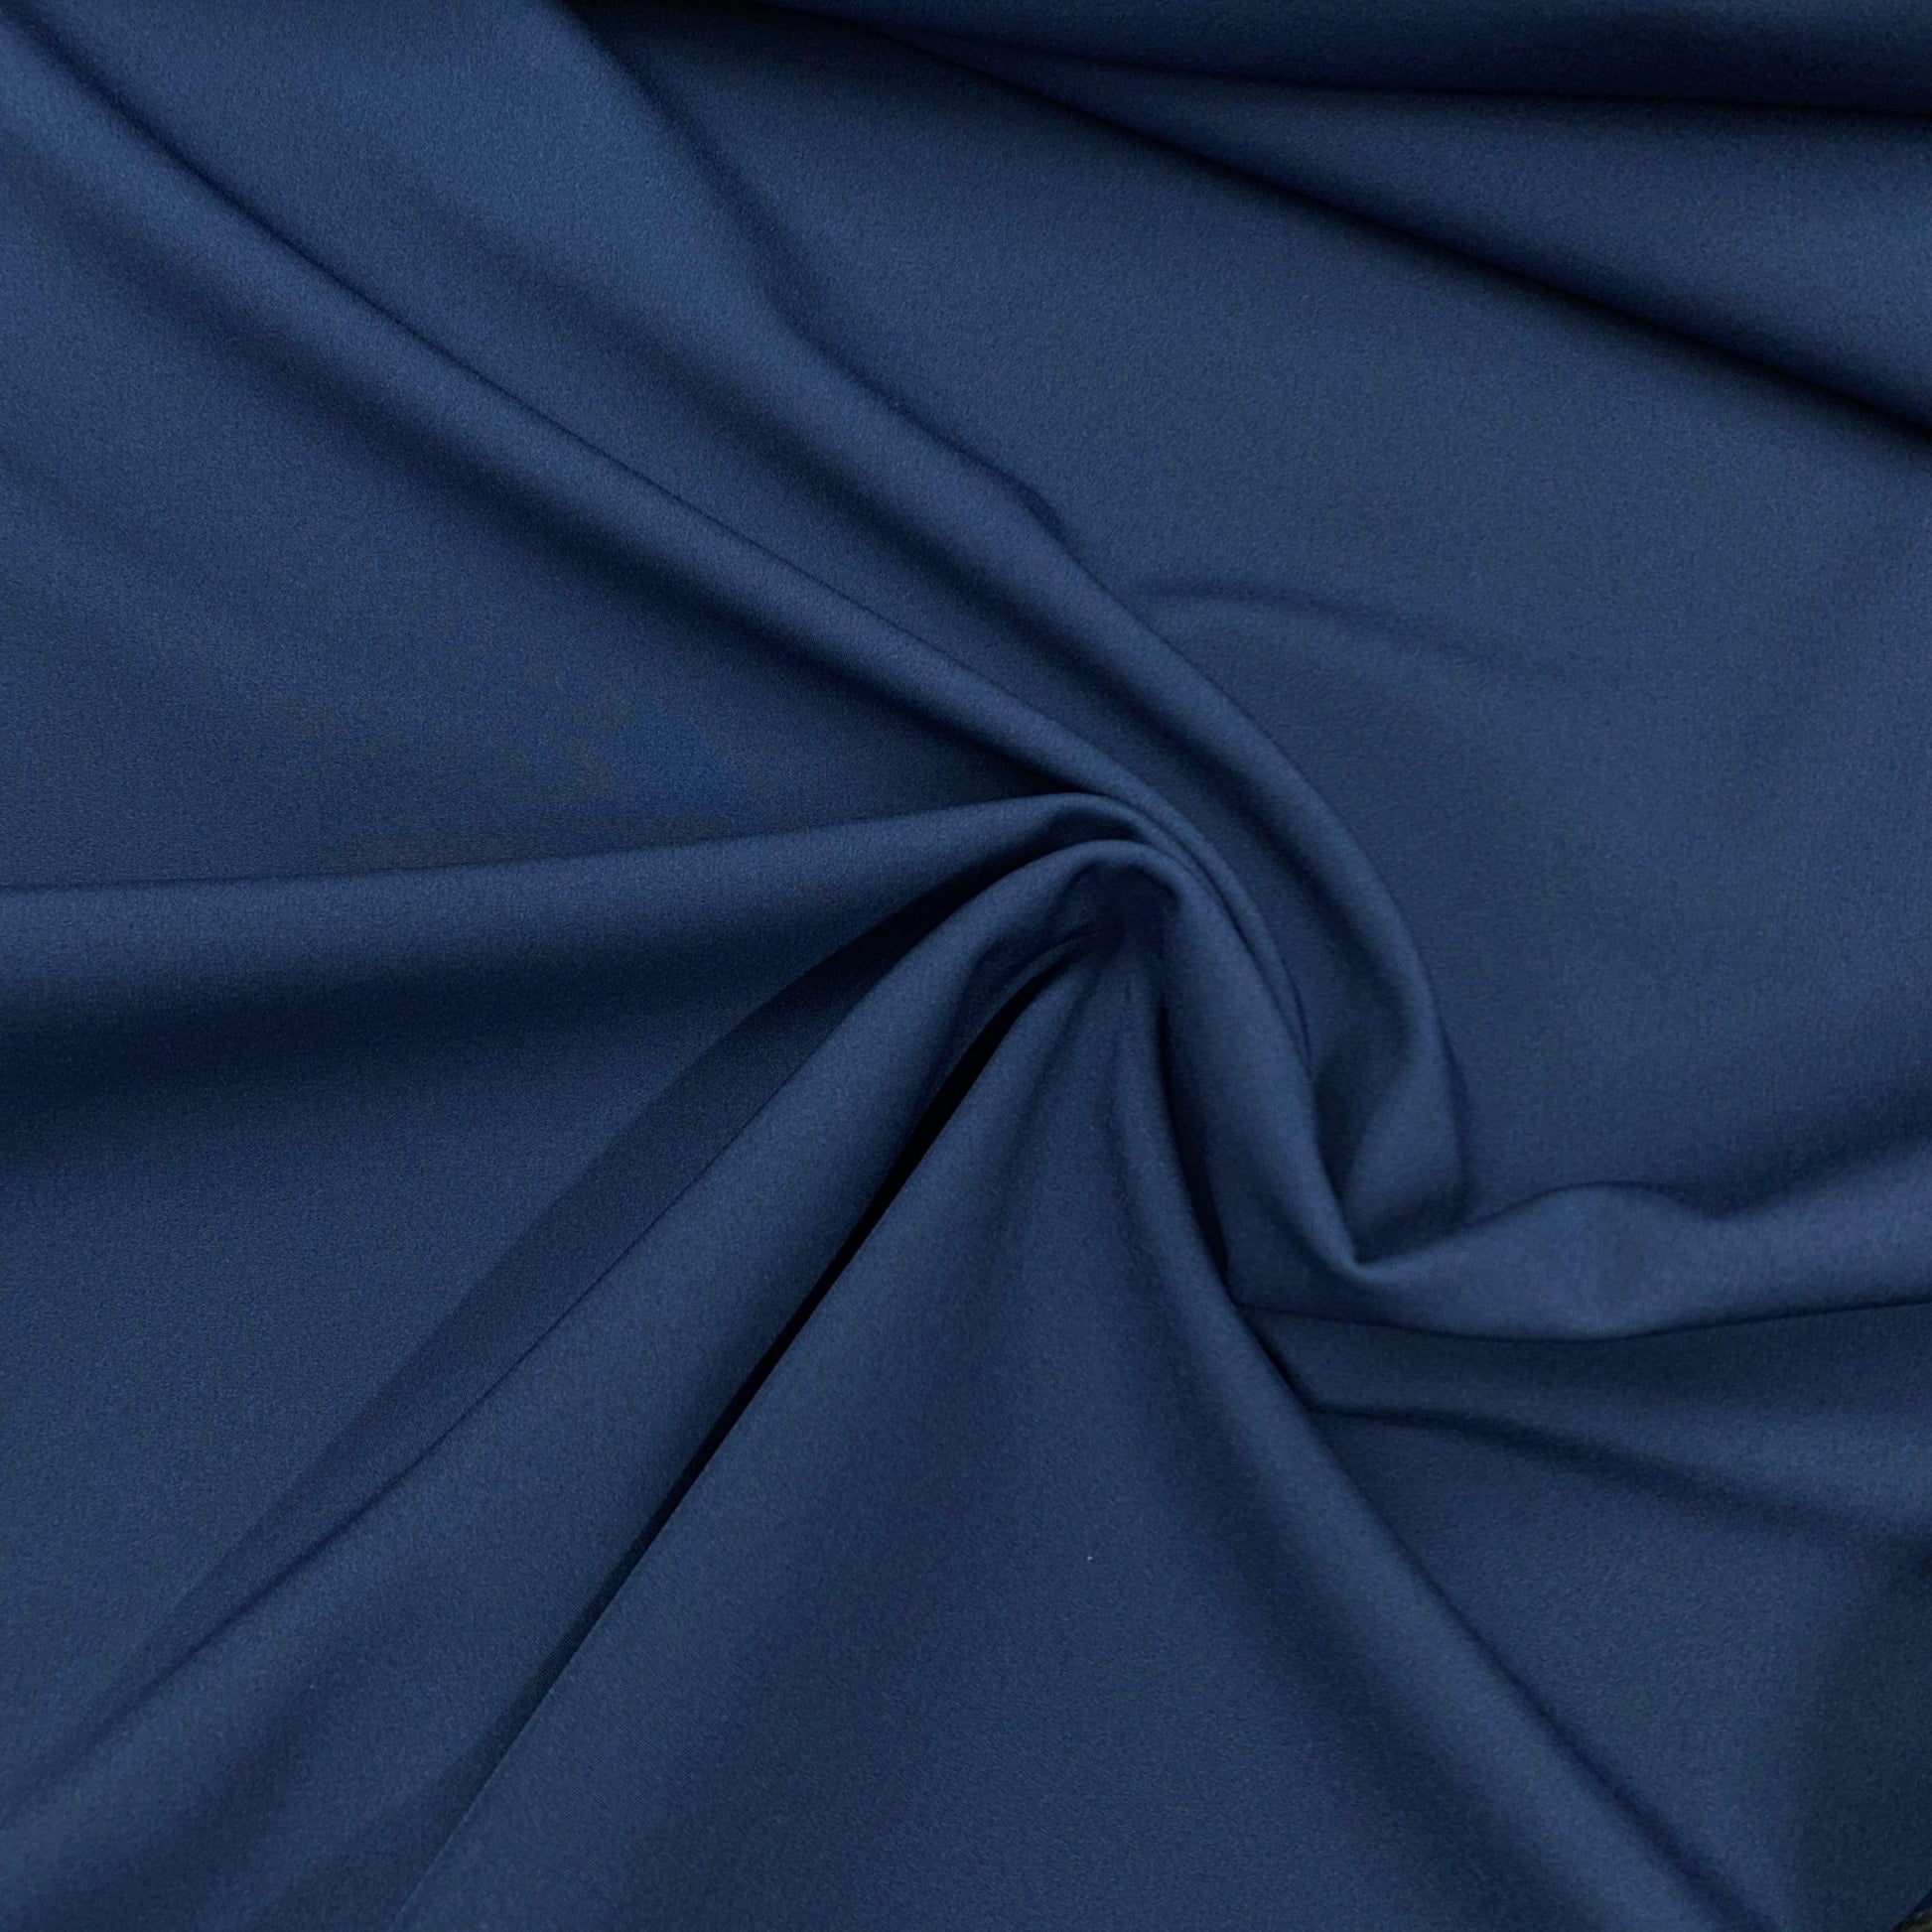 Navy and Black Softshell Fabric - Two Sides - Nature's Fabrics